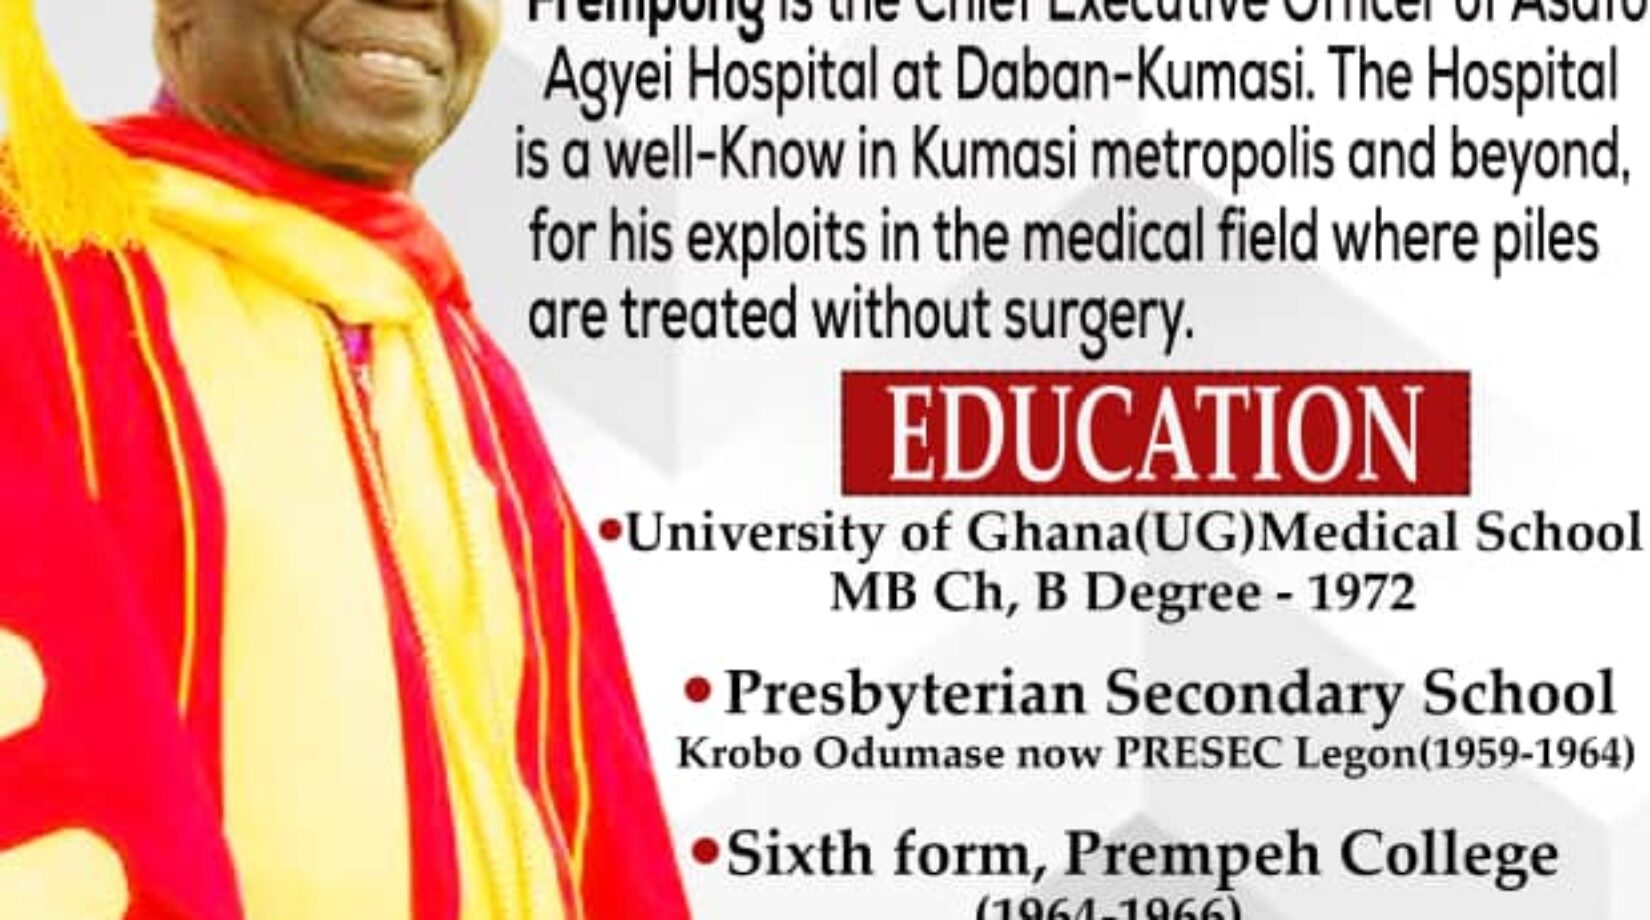 PROF.ASAFO-AGYEI TO CELEBRATE 50YRS IN MEDICAL PRACTICE ON OCT.23RD